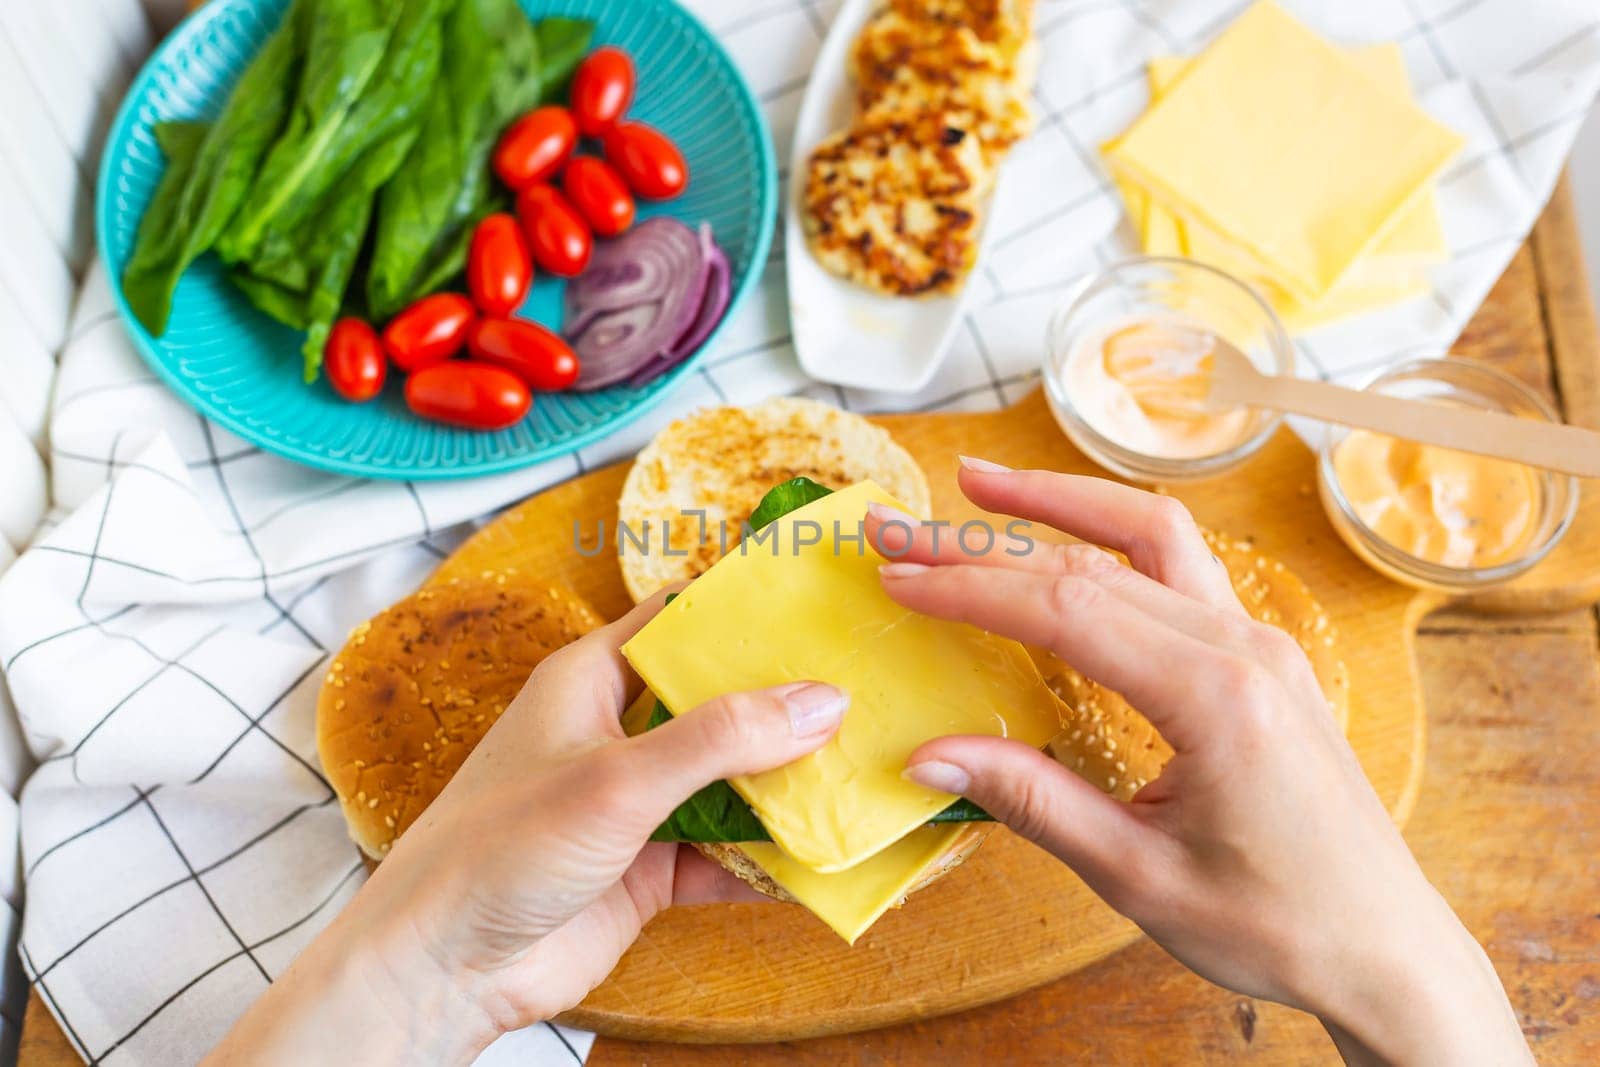 Preparation of all the ingredients for making a burger - bun, cutlet, cheese, salad, tomato, sauces. The girl s hands take a burger bun and put cheese on top of a cutlet